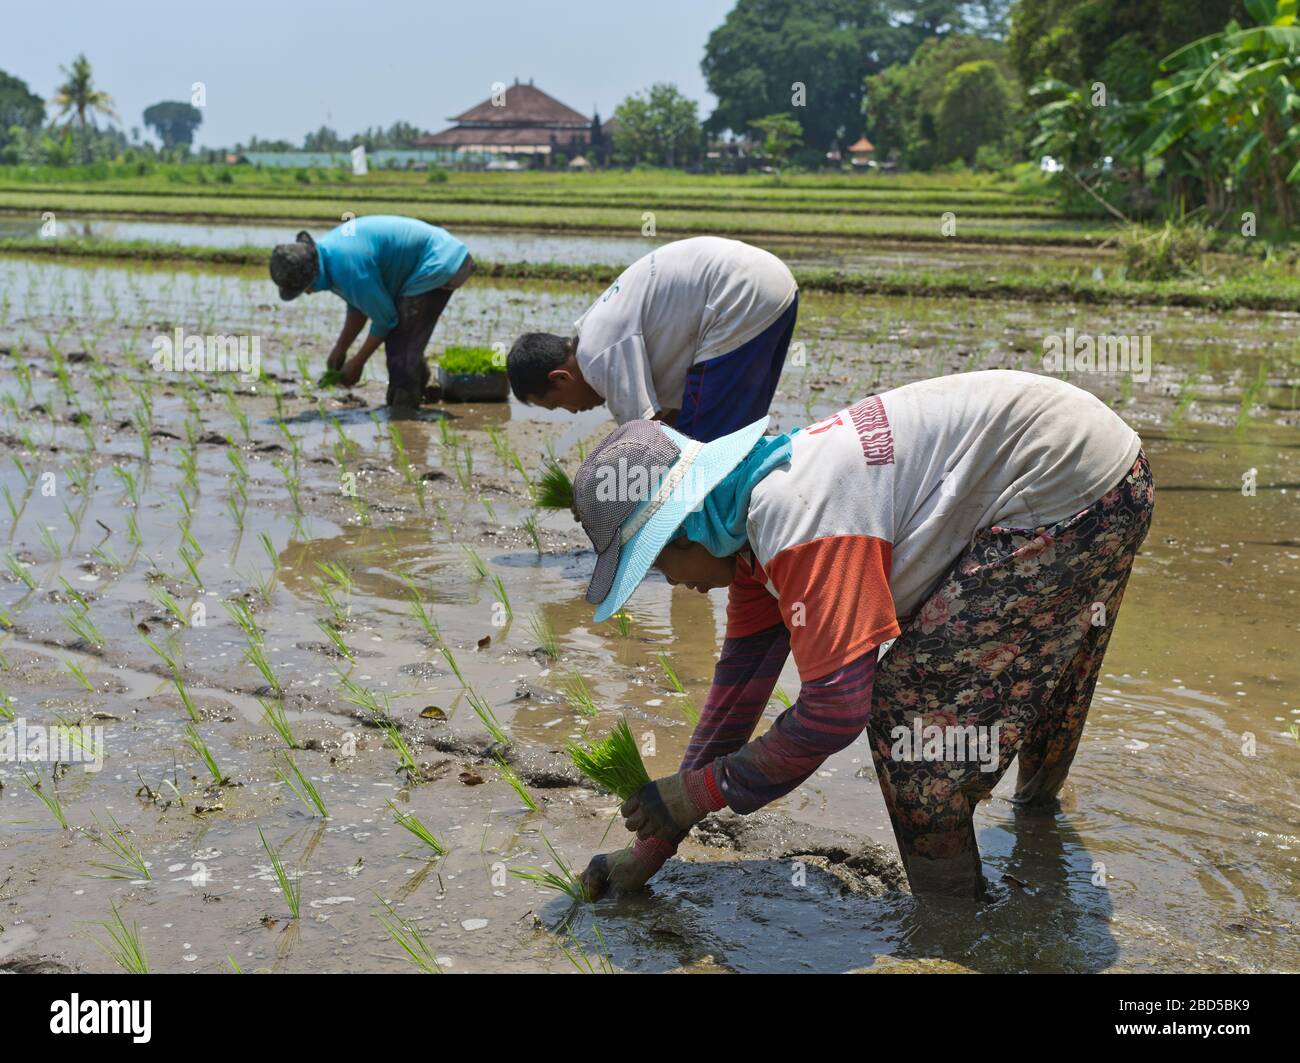 dh Indonesian workers in fields BALI INDONESIA Local Balinese woman worker wet rice paddy field asia people paddies women rural farming person Stock Photo